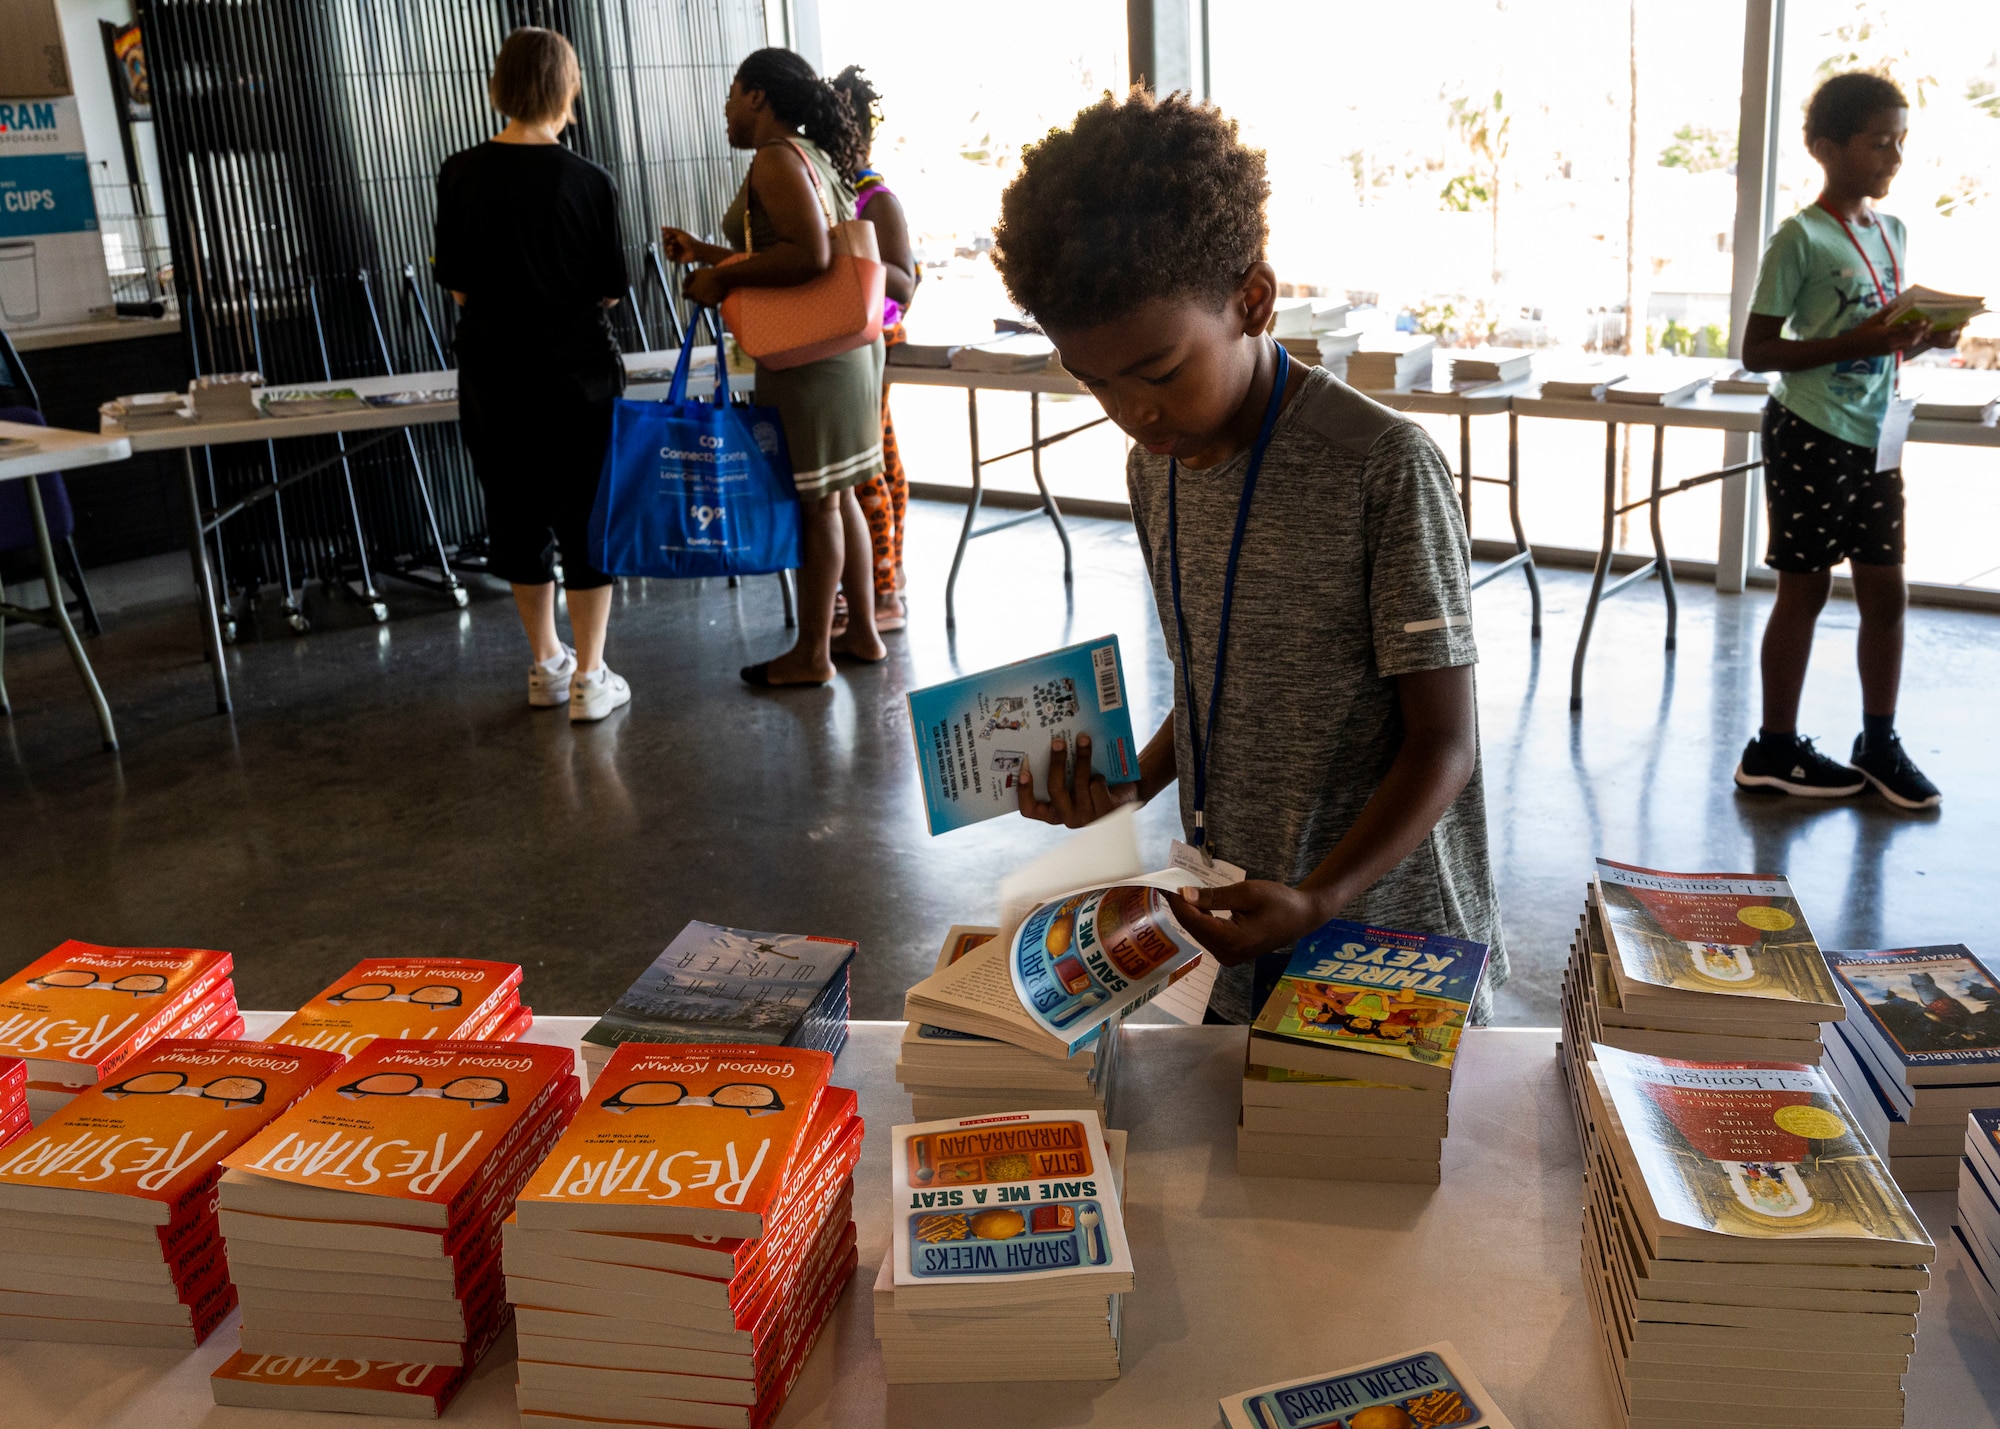 A child reads through some of the books available at the Back to School Bash event July 20, 2022, at Grand Canyon University, Phoenix, Arizona.